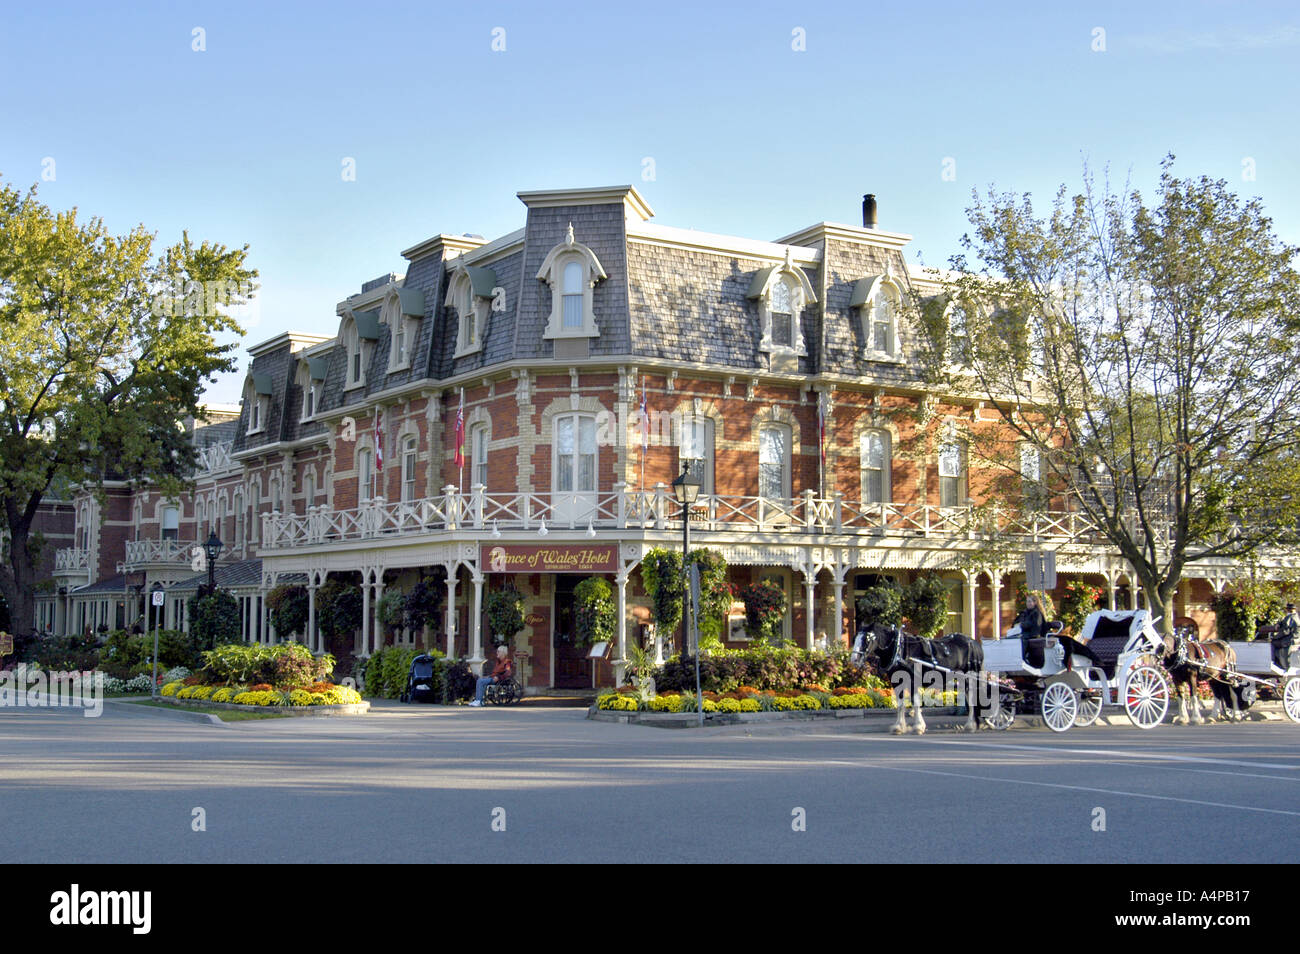 Street scenes of the quaint shopping district of Niagara on the Lake Ontario Canada Stock Photo